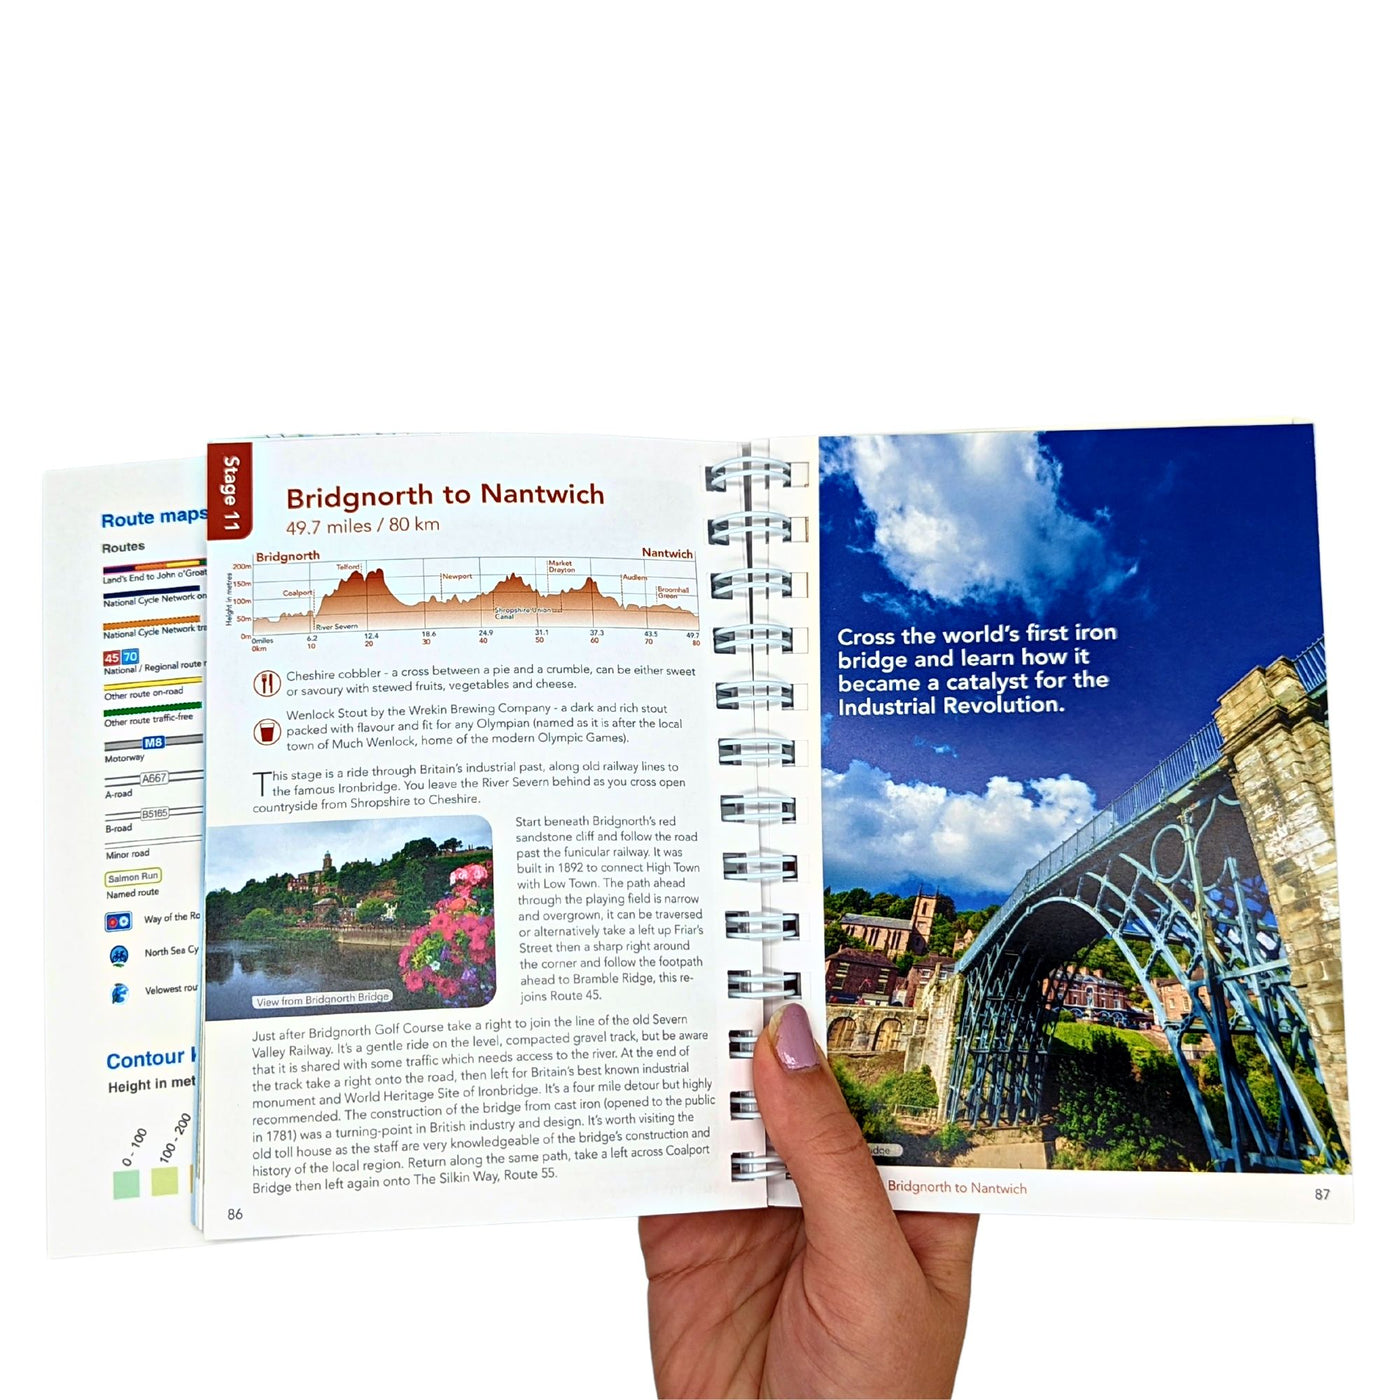 Hand holding guidebook open, showing a title page with a full colour blue sky photo and a route profile.